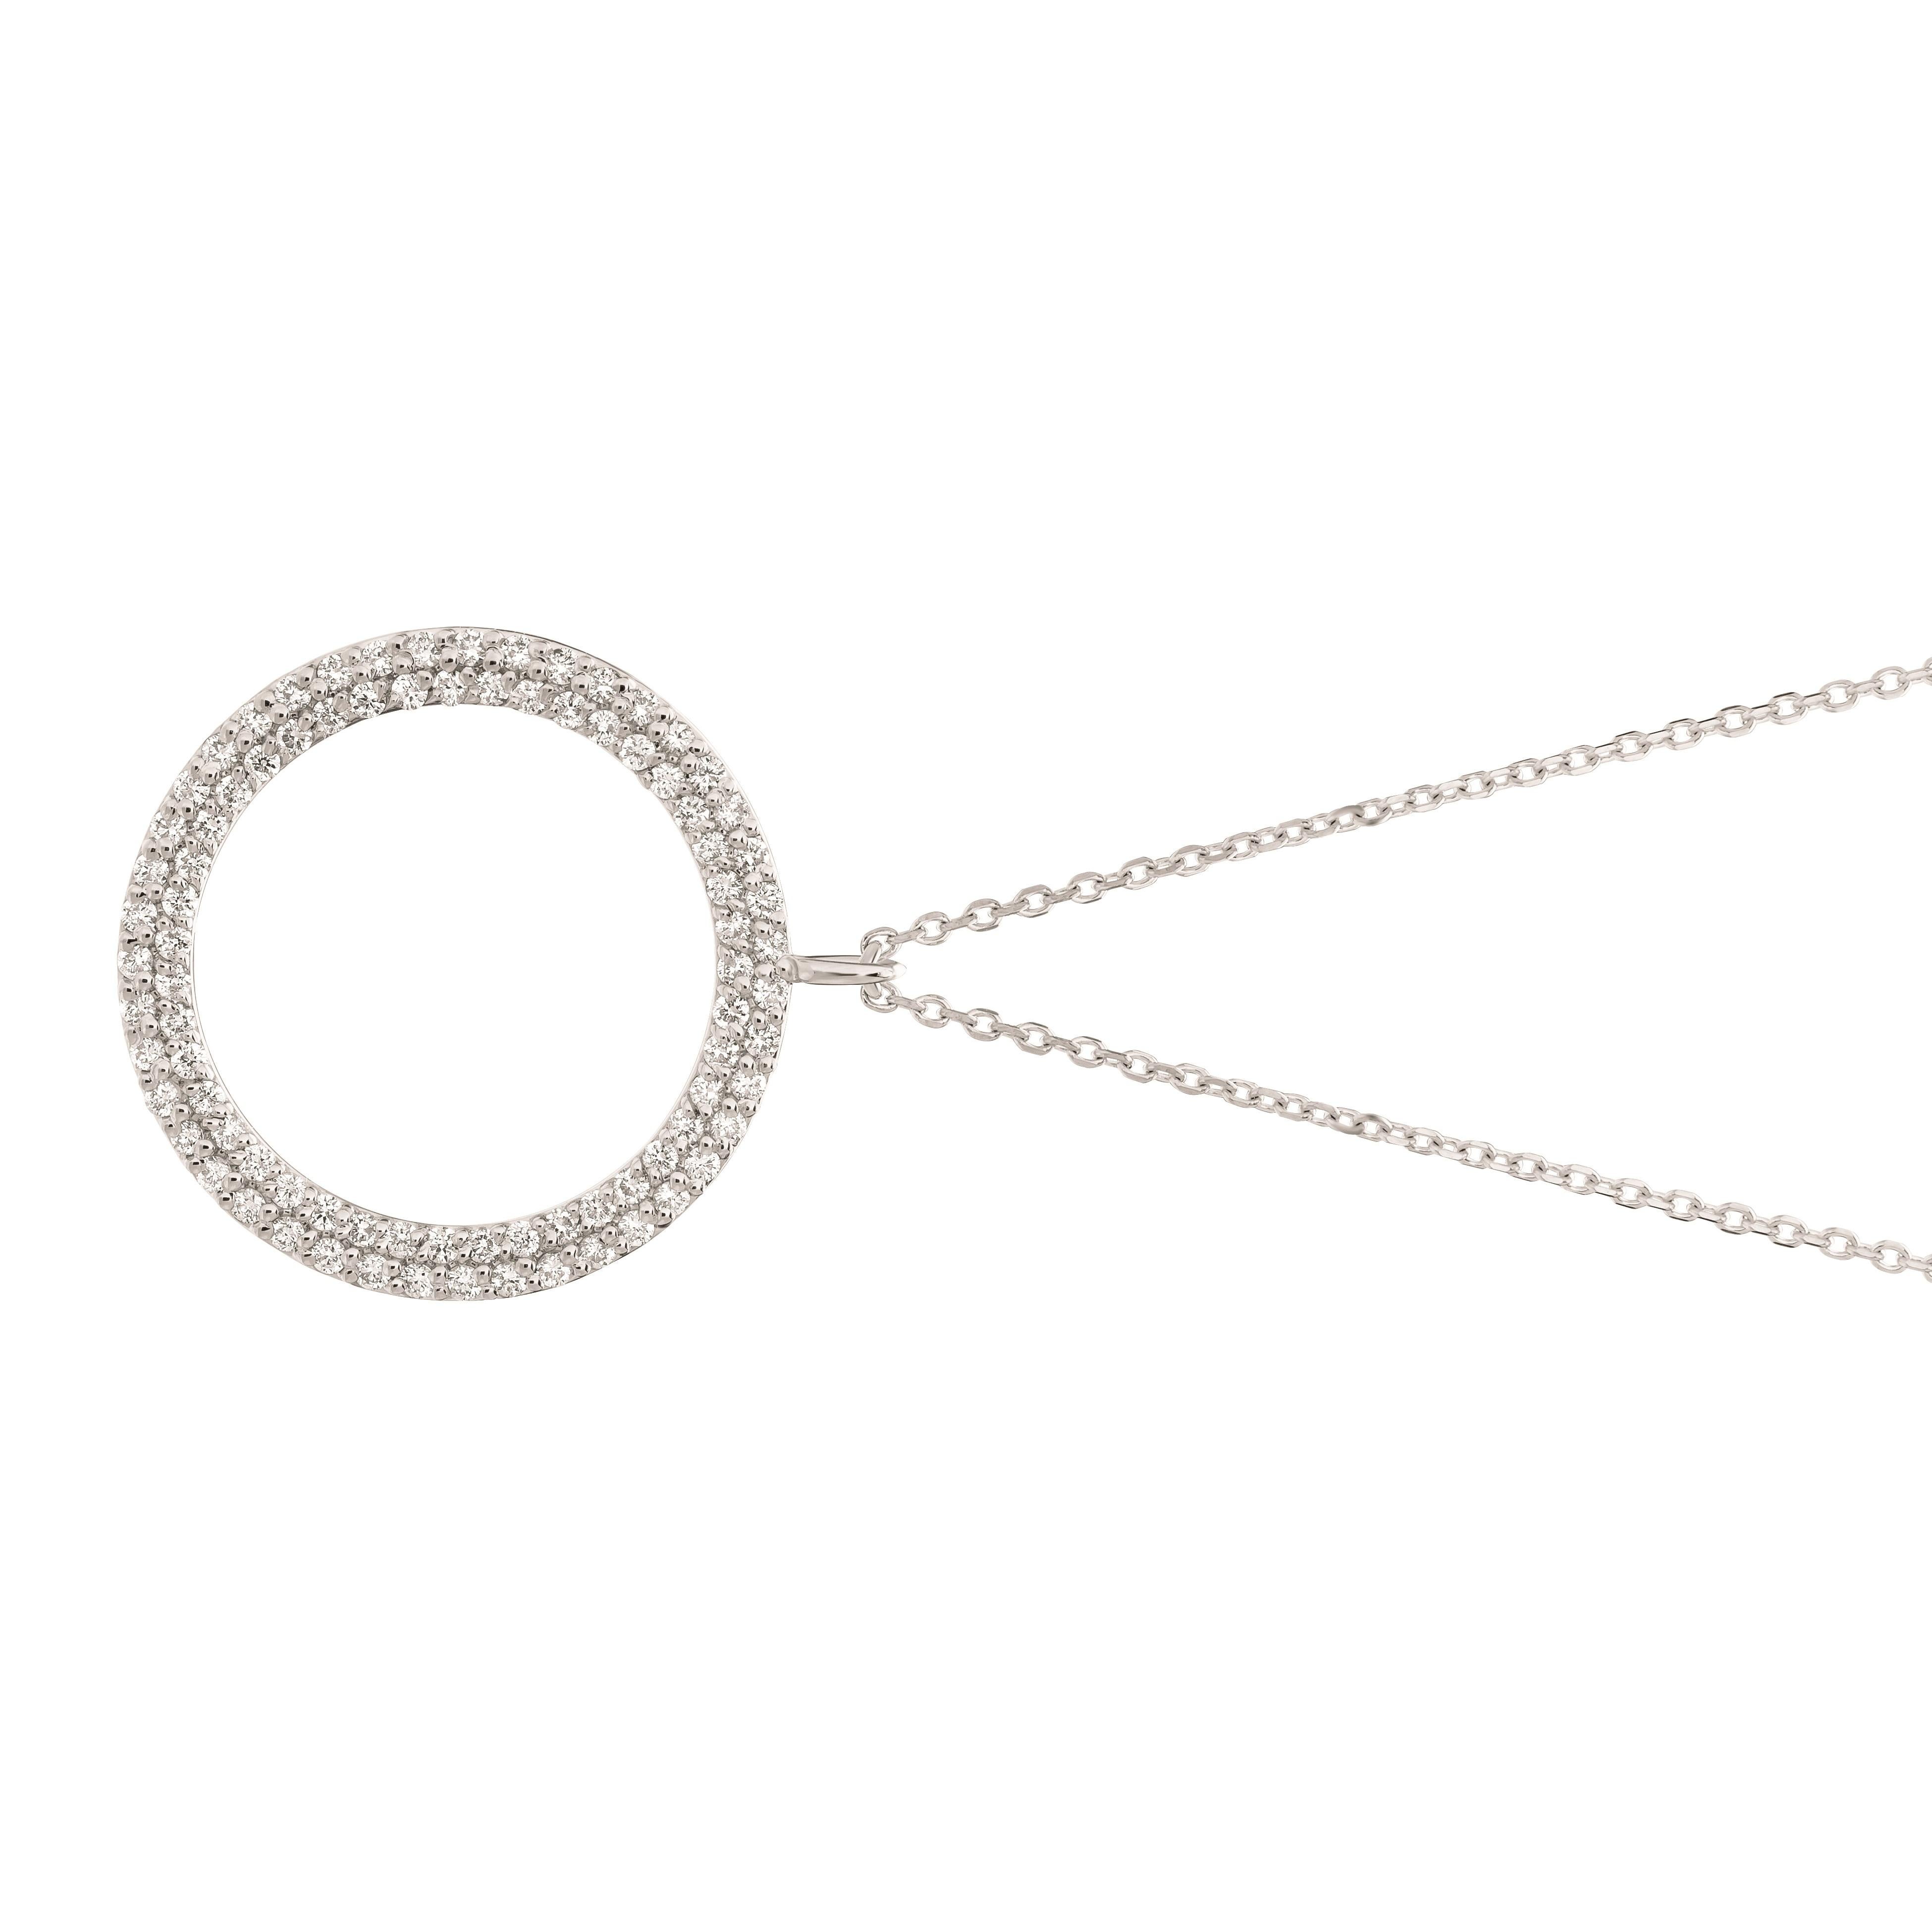 0.75 Carat Natural Diamond Circle Necklace 14K White Gold G SI 18 inches chain

100% Natural Diamonds, Not Enhanced in any way Round Cut Diamond Necklace
0.75CT
G-H
SI
14K White Gold, Pave style , 3.7 grams
1 1/16 inch in height, 7/8 inch in